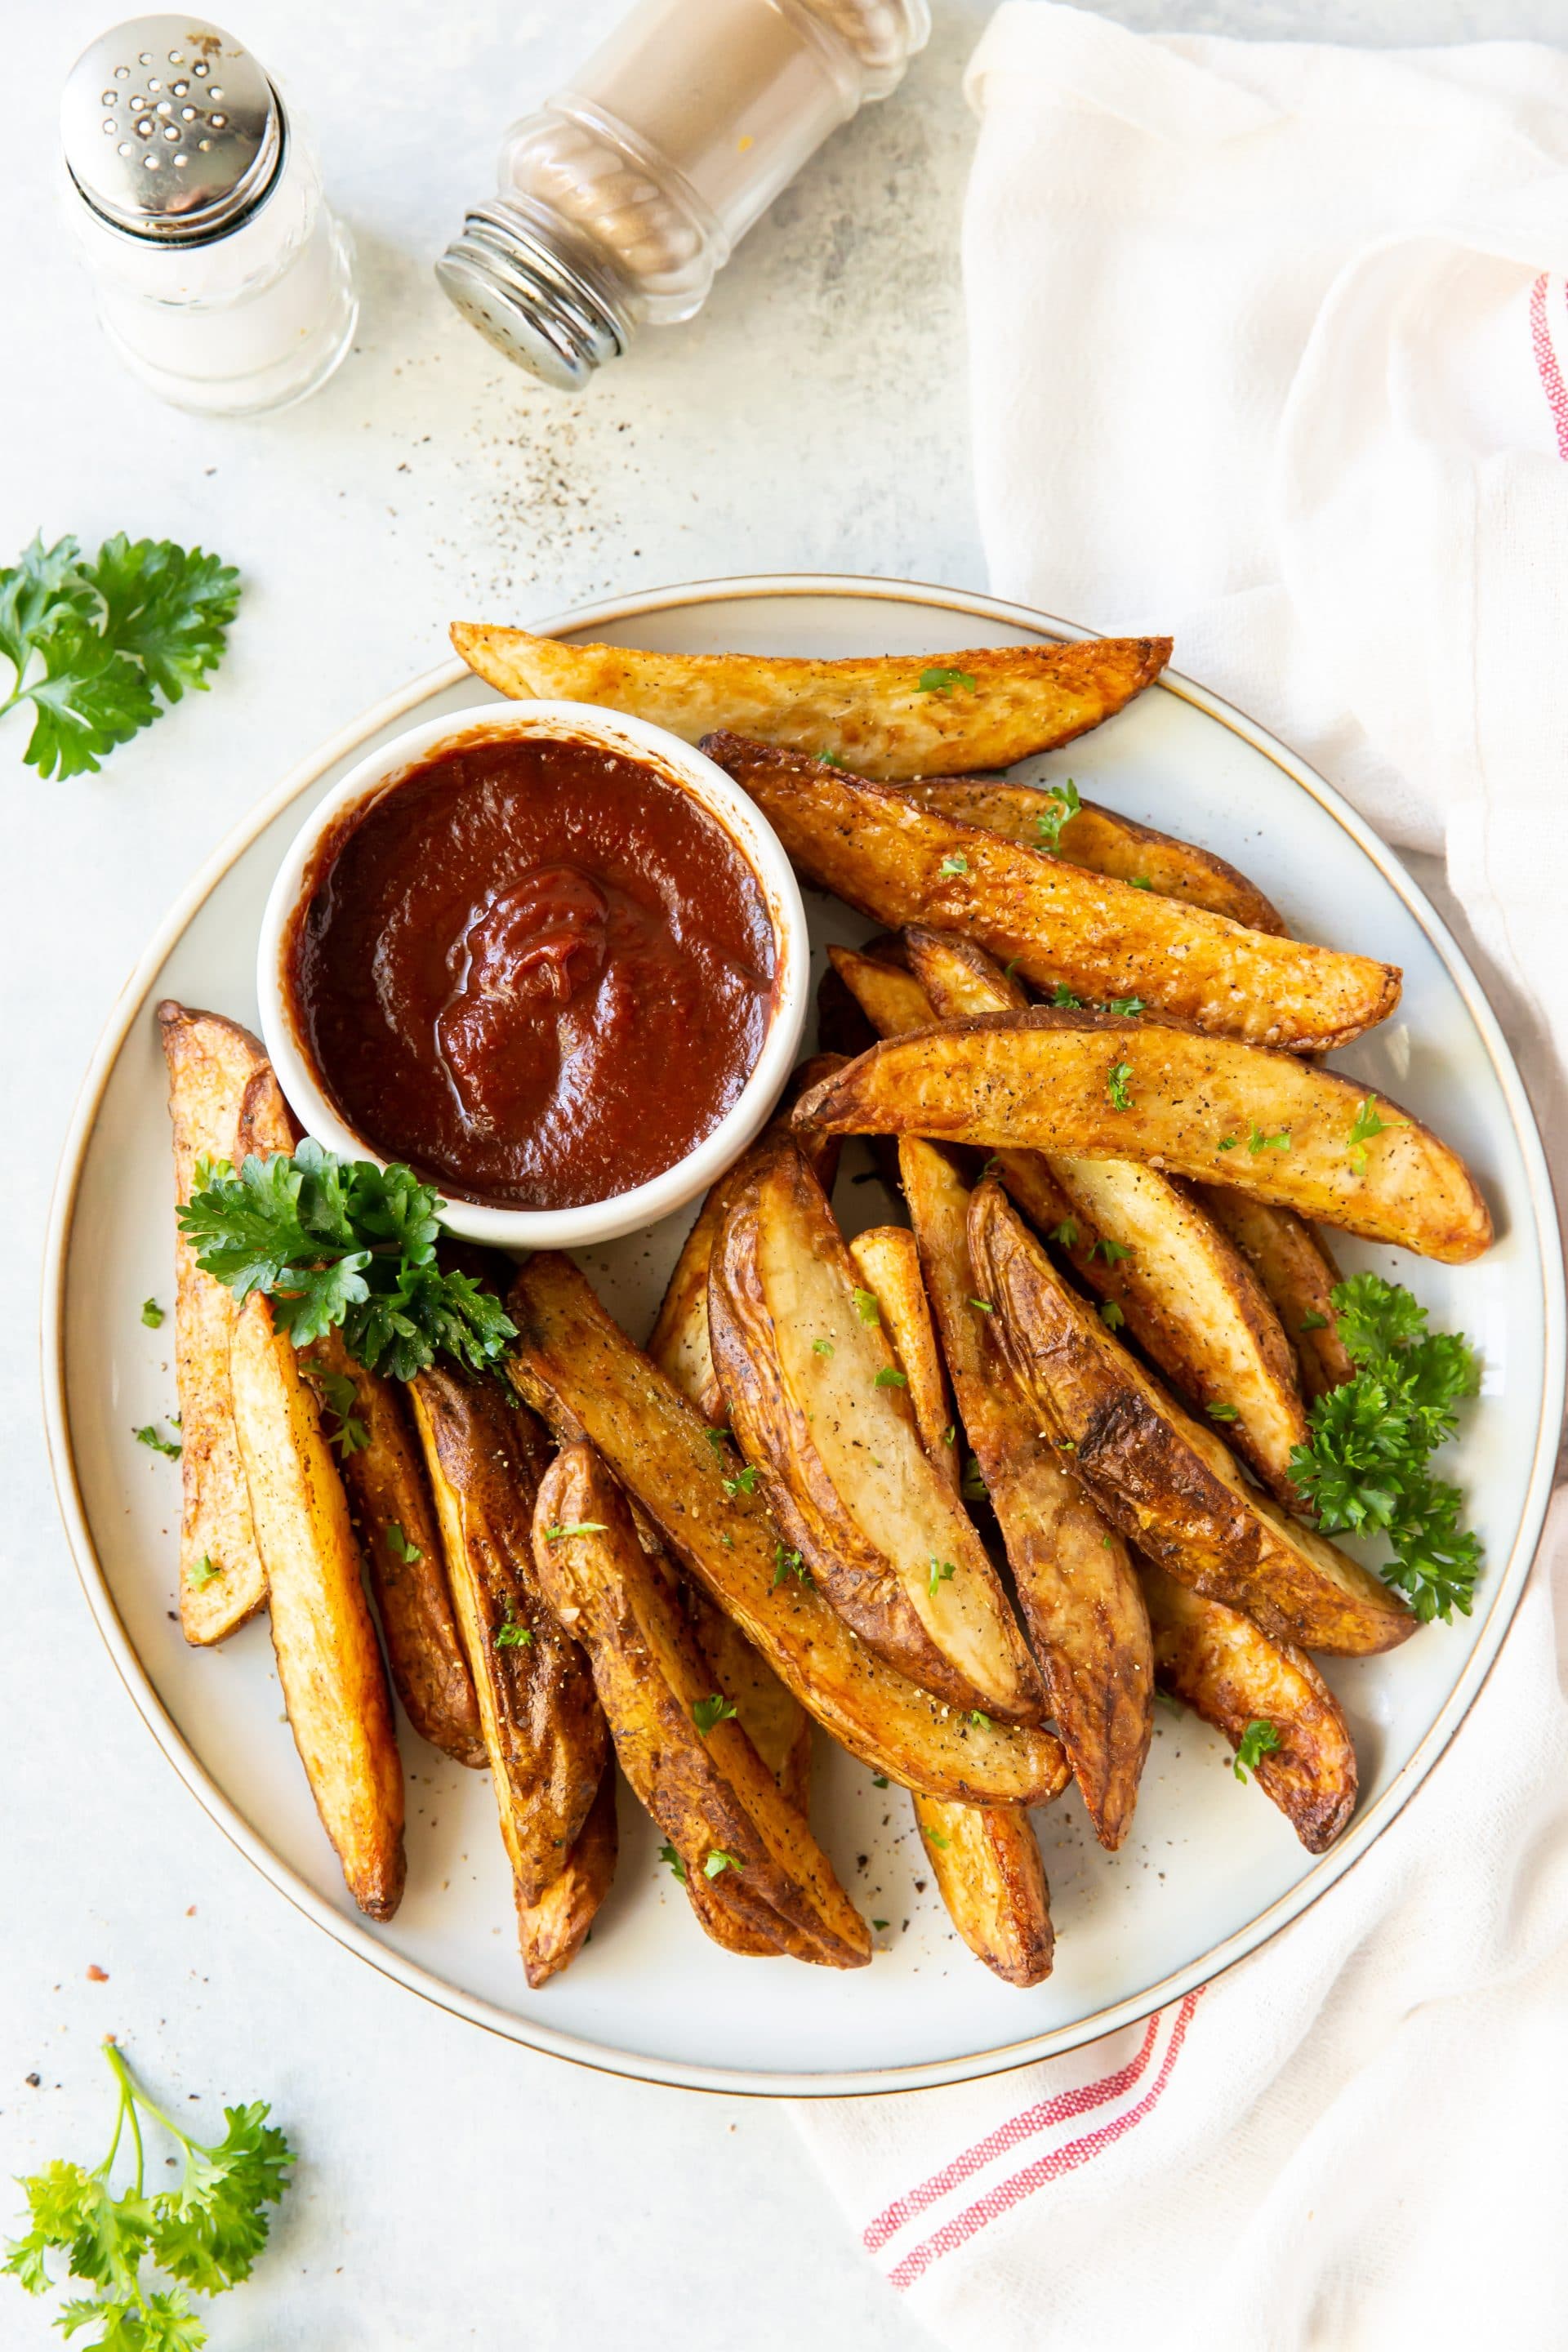 a plate of seasoned, cooked potato wedges with a side cup of ketchup.